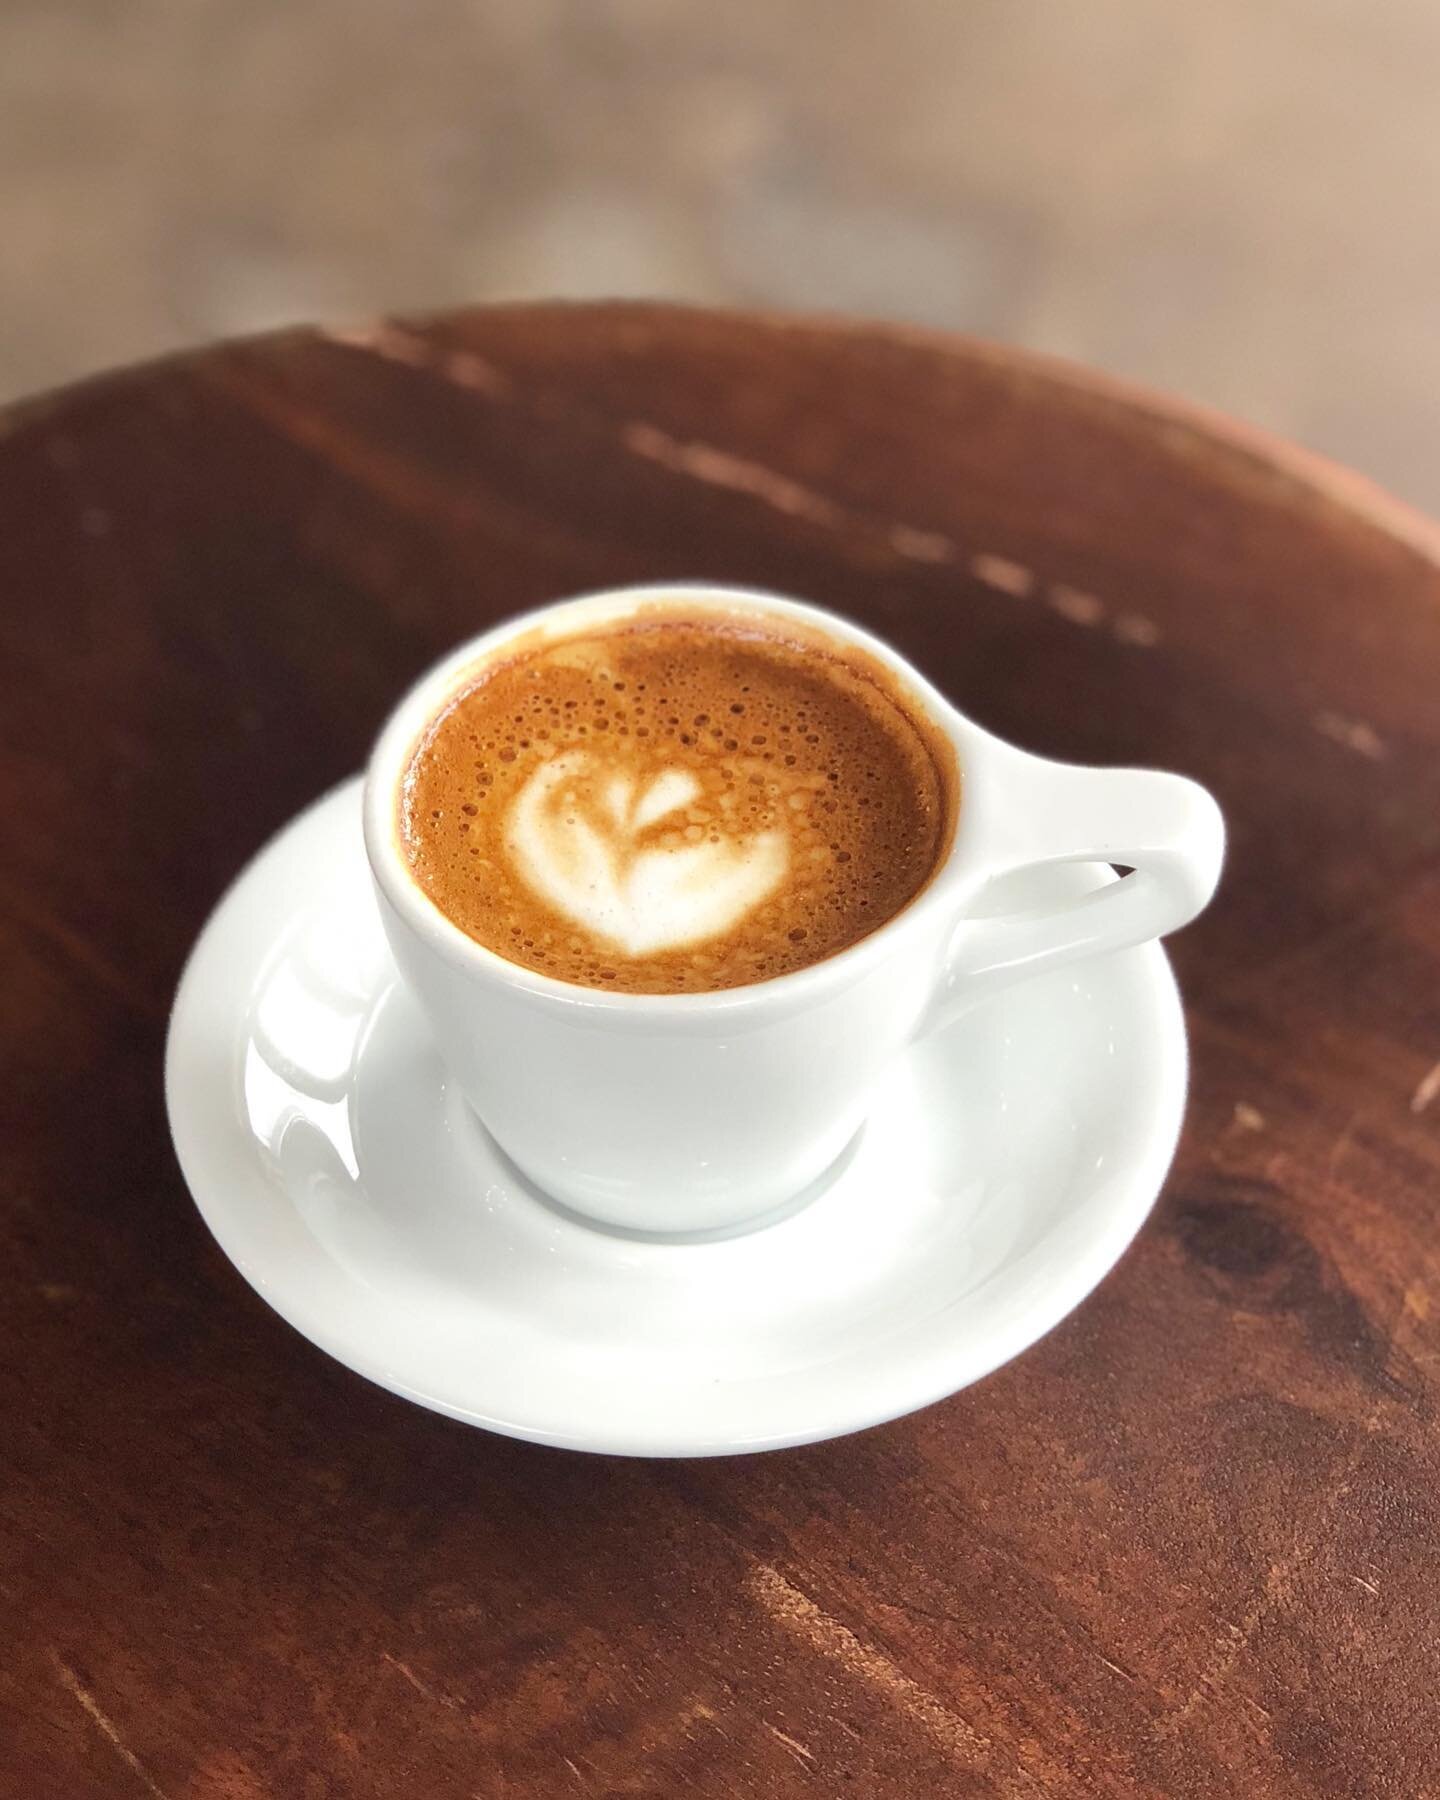 Happy National Coffee Day! 

Here are some of my favorite coffee shops around town. Which one is your fave? 

#nationalcoffeeday #yomarianablog #coffee #coffeelover #coffeetime #coffeehouston #houston #houstontx